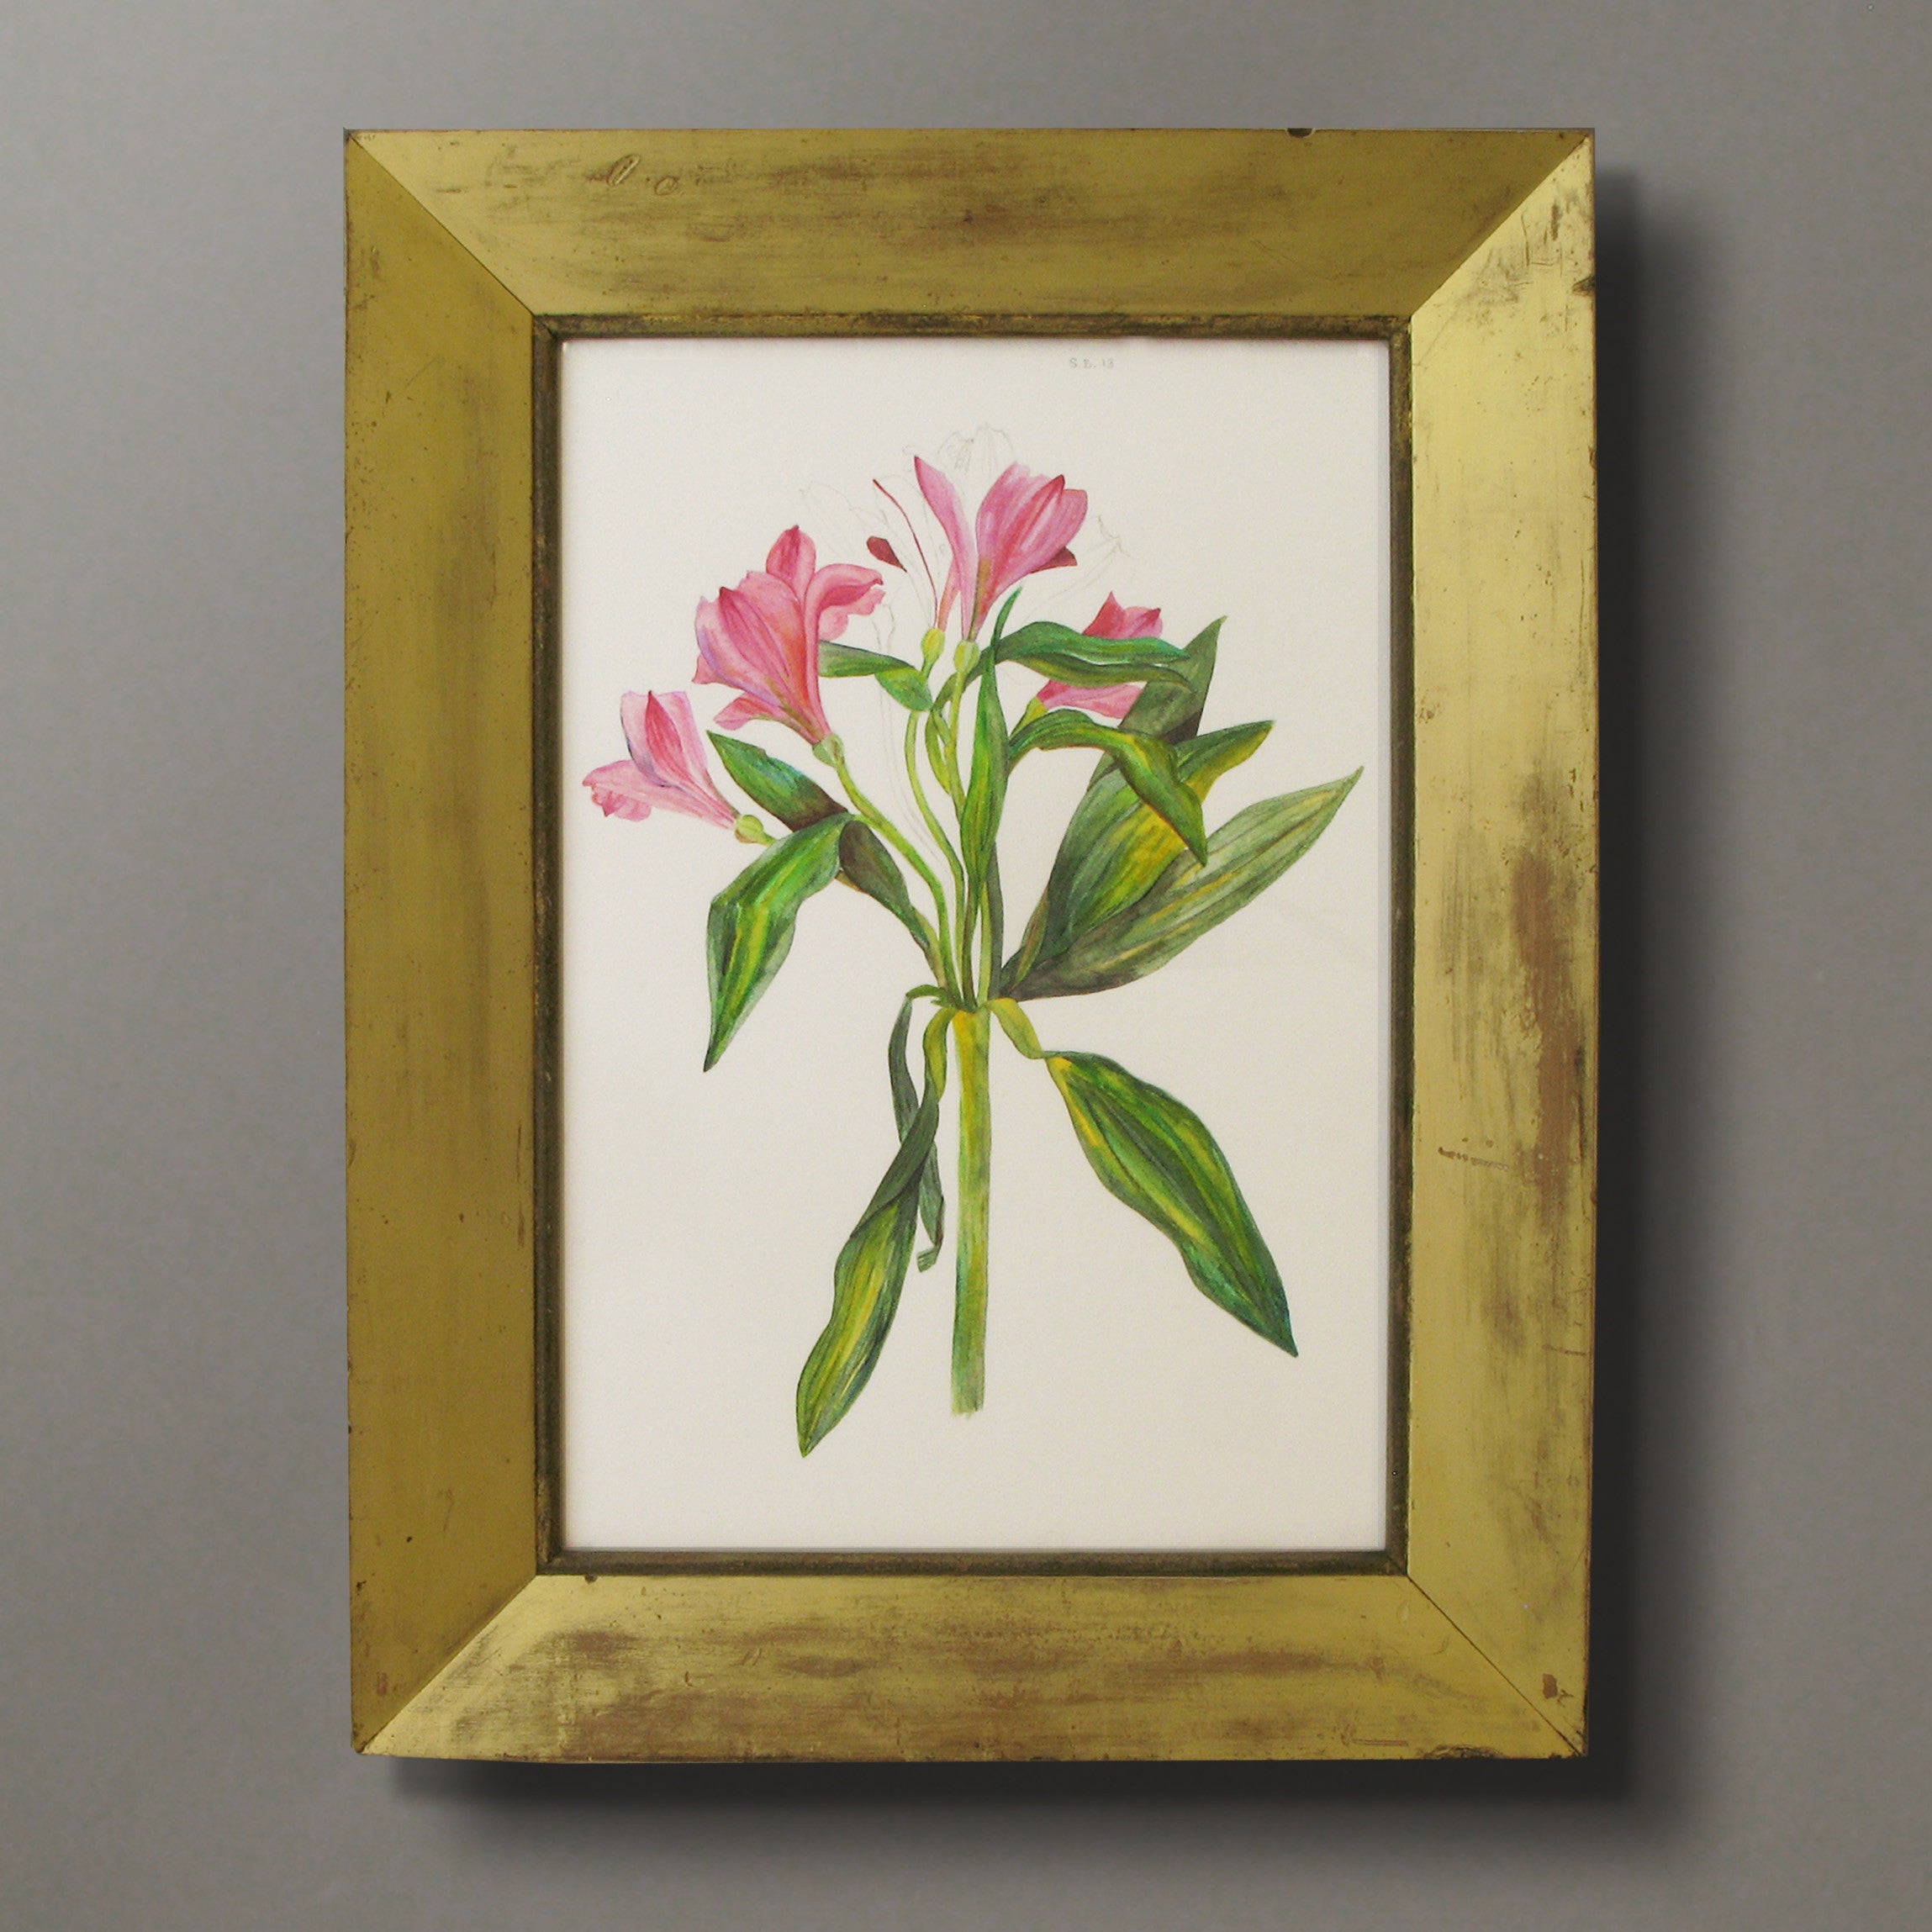 Pink Floral Watercolor and Pencil by Sarah Beaufoy, 21st Century